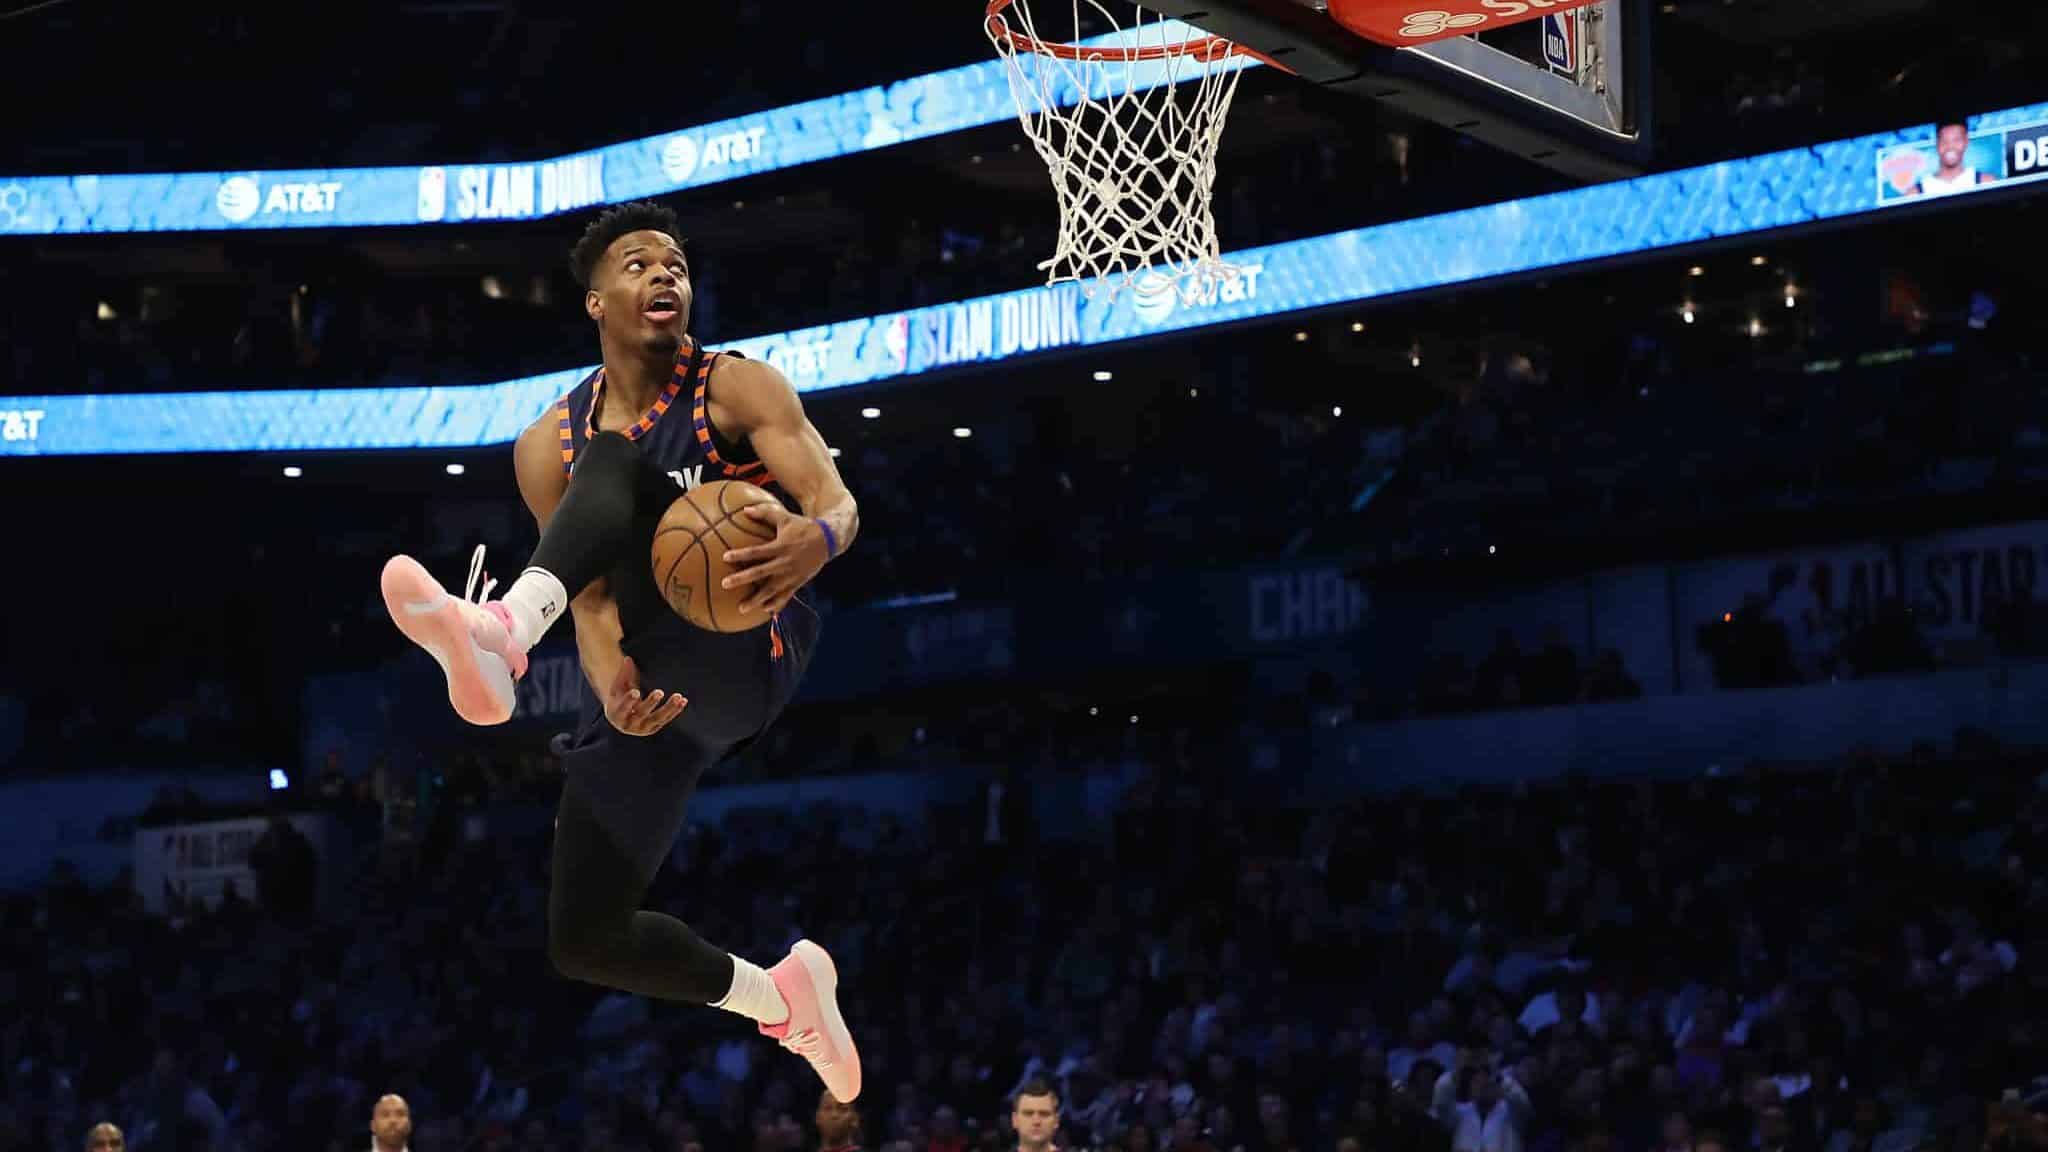 CHARLOTTE, NORTH CAROLINA - FEBRUARY 16: Dennis Smith, Jr. #5 of the New York Knicks goes up for a dunk during the AT&T Slam Dunk as part of the 2019 NBA All-Star Weekend at Spectrum Center on February 16, 2019 in Charlotte, North Carolina.